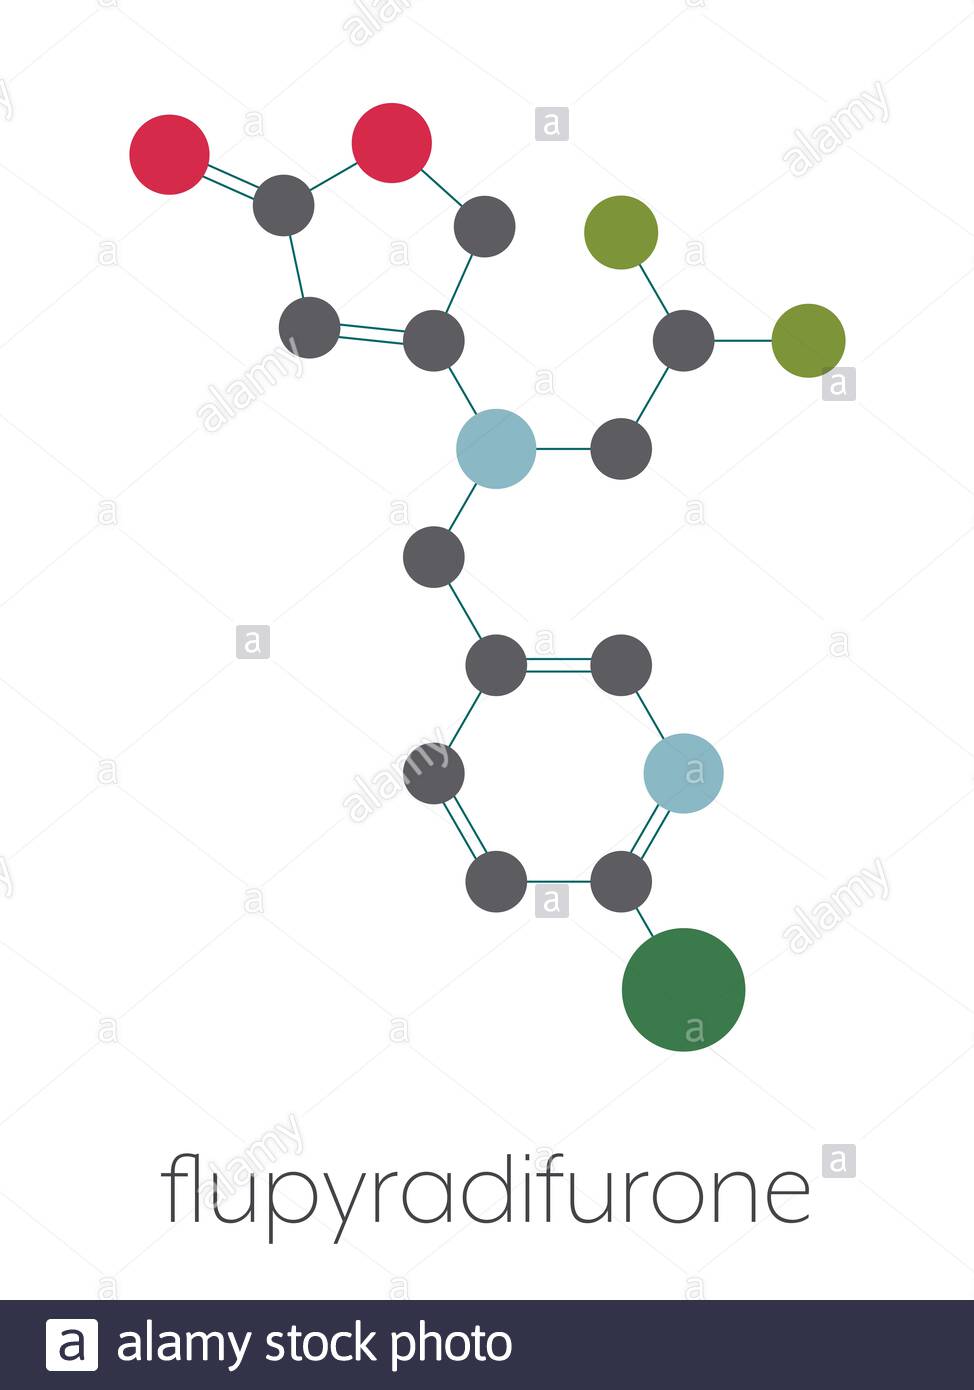 Flupyradifurone neonicotinoid insecticide molecule. Stylized skeletal  formula (chemical structure): Atoms are shown as color-coded circles:  hydrogen (hidden), carbon (grey), oxygen (red), nitrogen (blue), chlorine  (green), fluorine (cyan Stock Photo ...